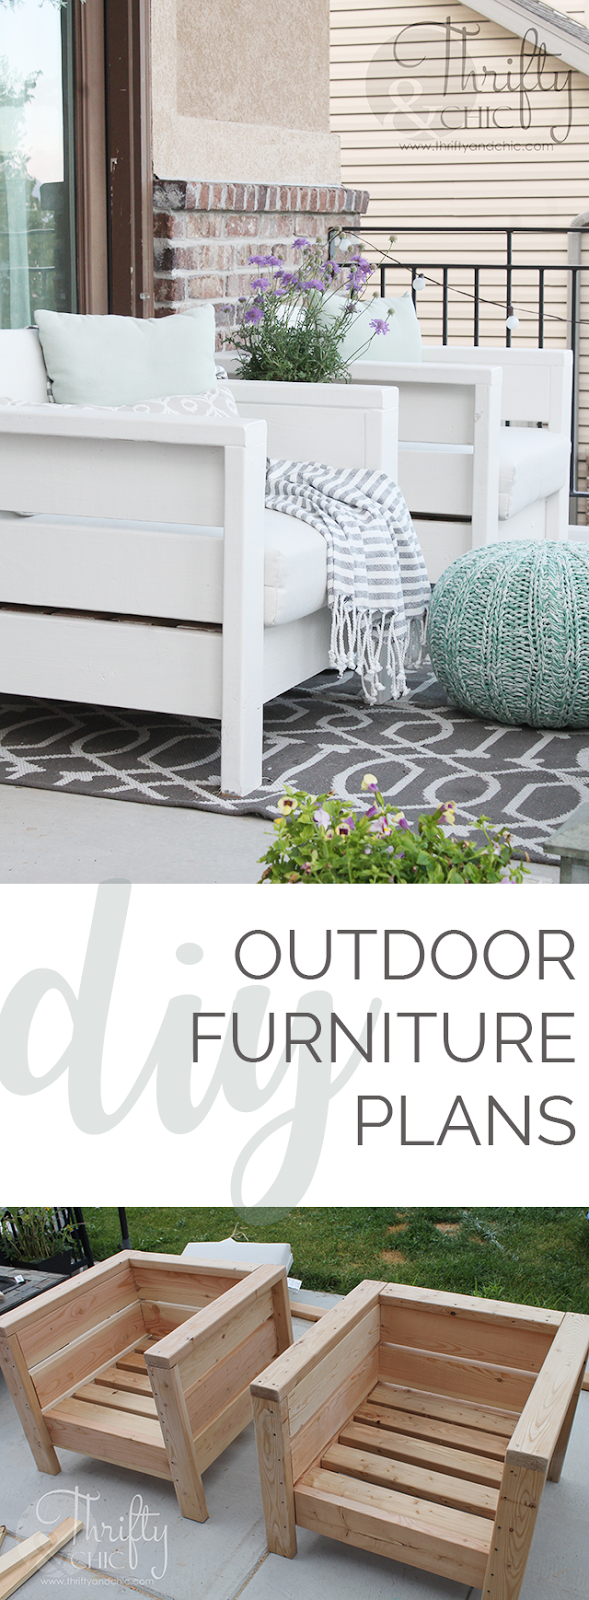 DIY outdoor porch or patio furniture. Learn how to make these chairs for about $20 each!  Porch and patio decor and decorating ideas